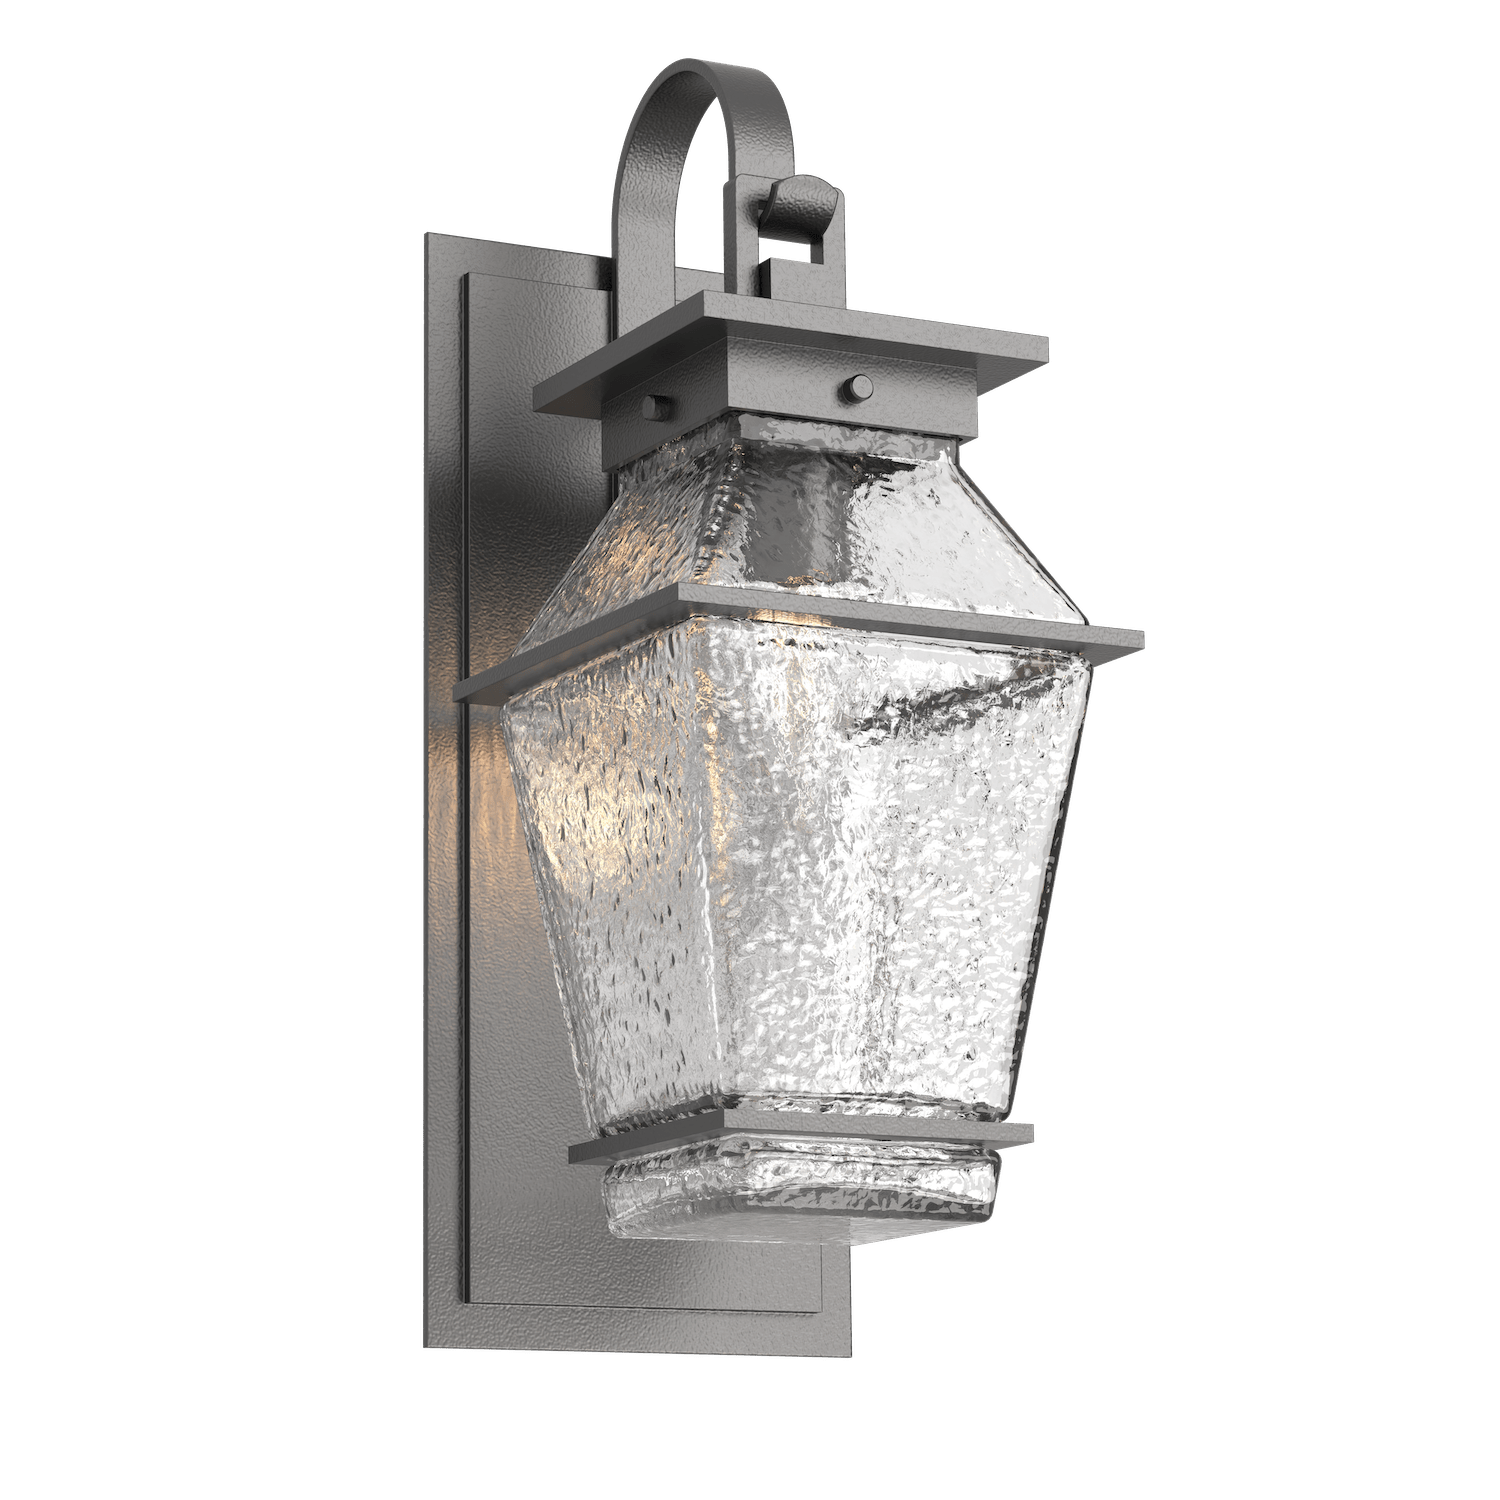 ODB0077-02-AG-C-Hammerton-Studio-Landmark-19-inch-outdoor-sconce-with-shepherds-hook-with-argento-grey-finish-and-clear-blown-glass-shades-and-incandescent-lamping